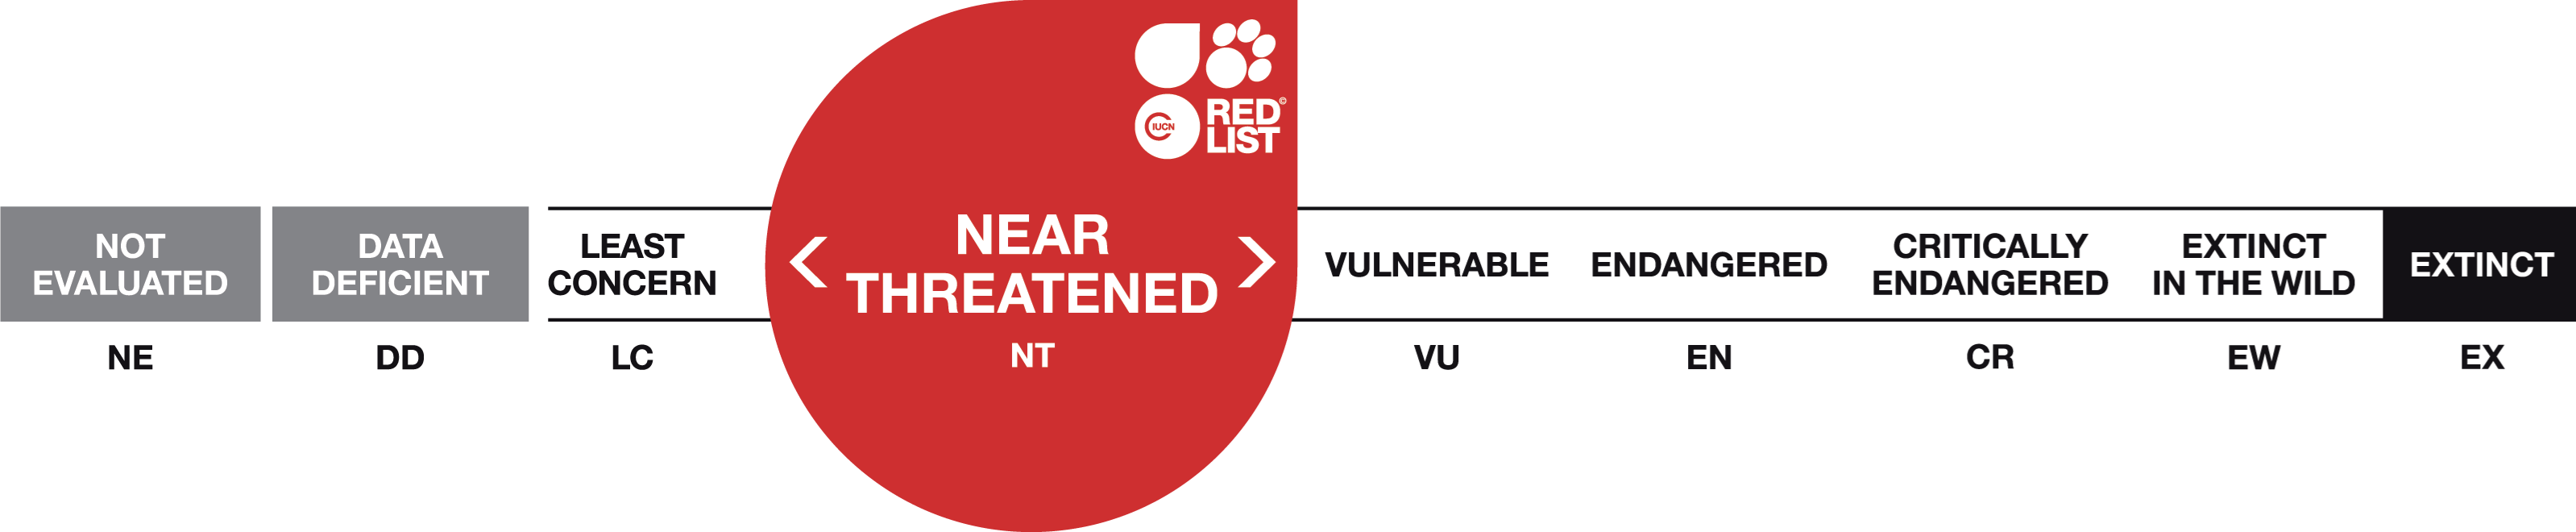 Red List Scale Near Threatened